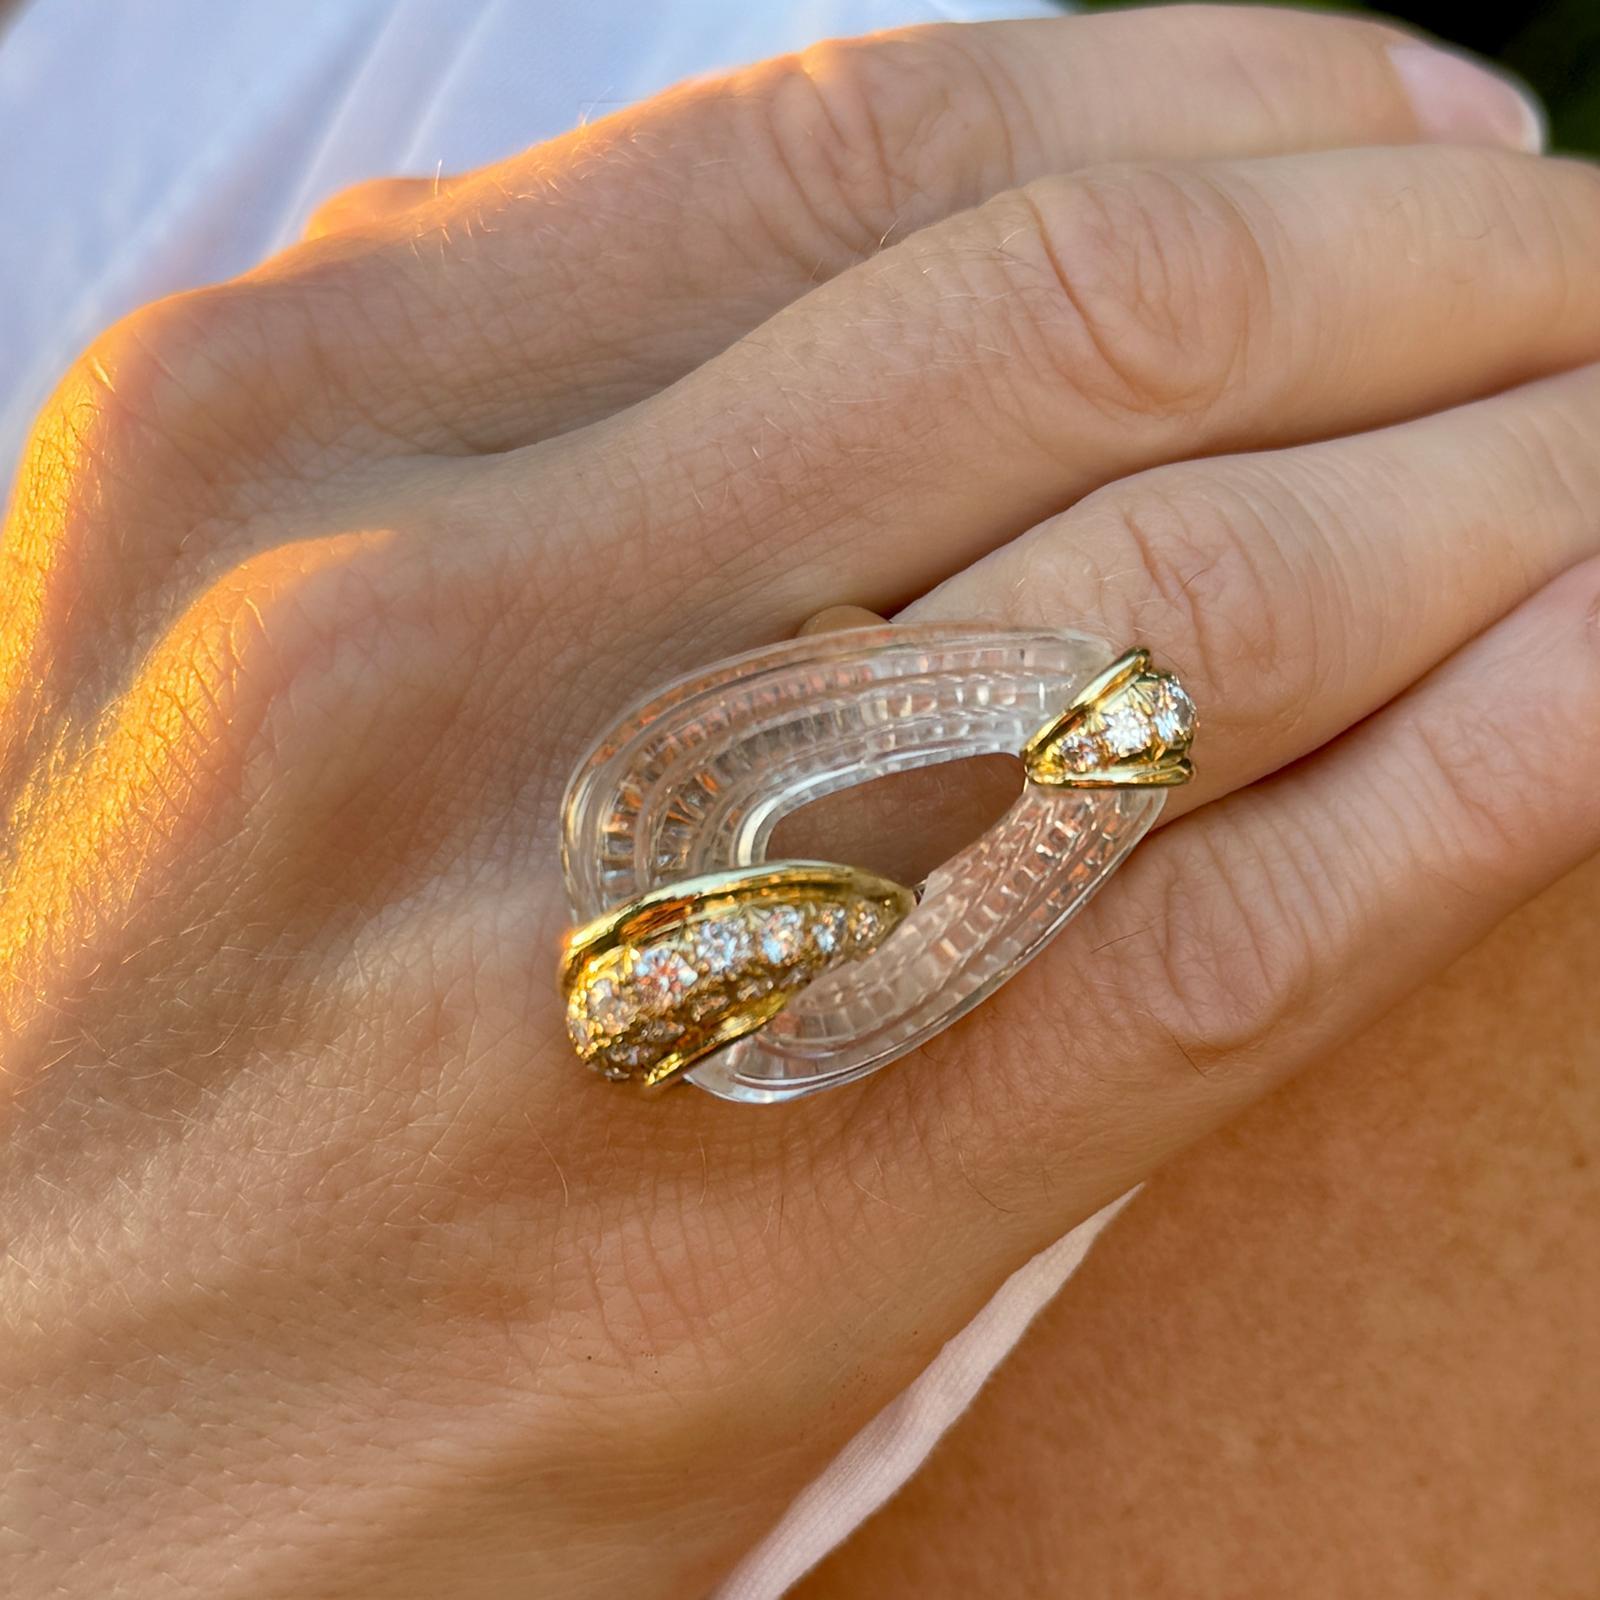 Gorgeous French carved rock crystal and diamond cocktali ring crafted in 18 karat yellow gold. The ring features 21 round brilliant cut diamonds weighing approximately 1.00 carat total weight and graded E-F color and VS clarity. The top measures 20